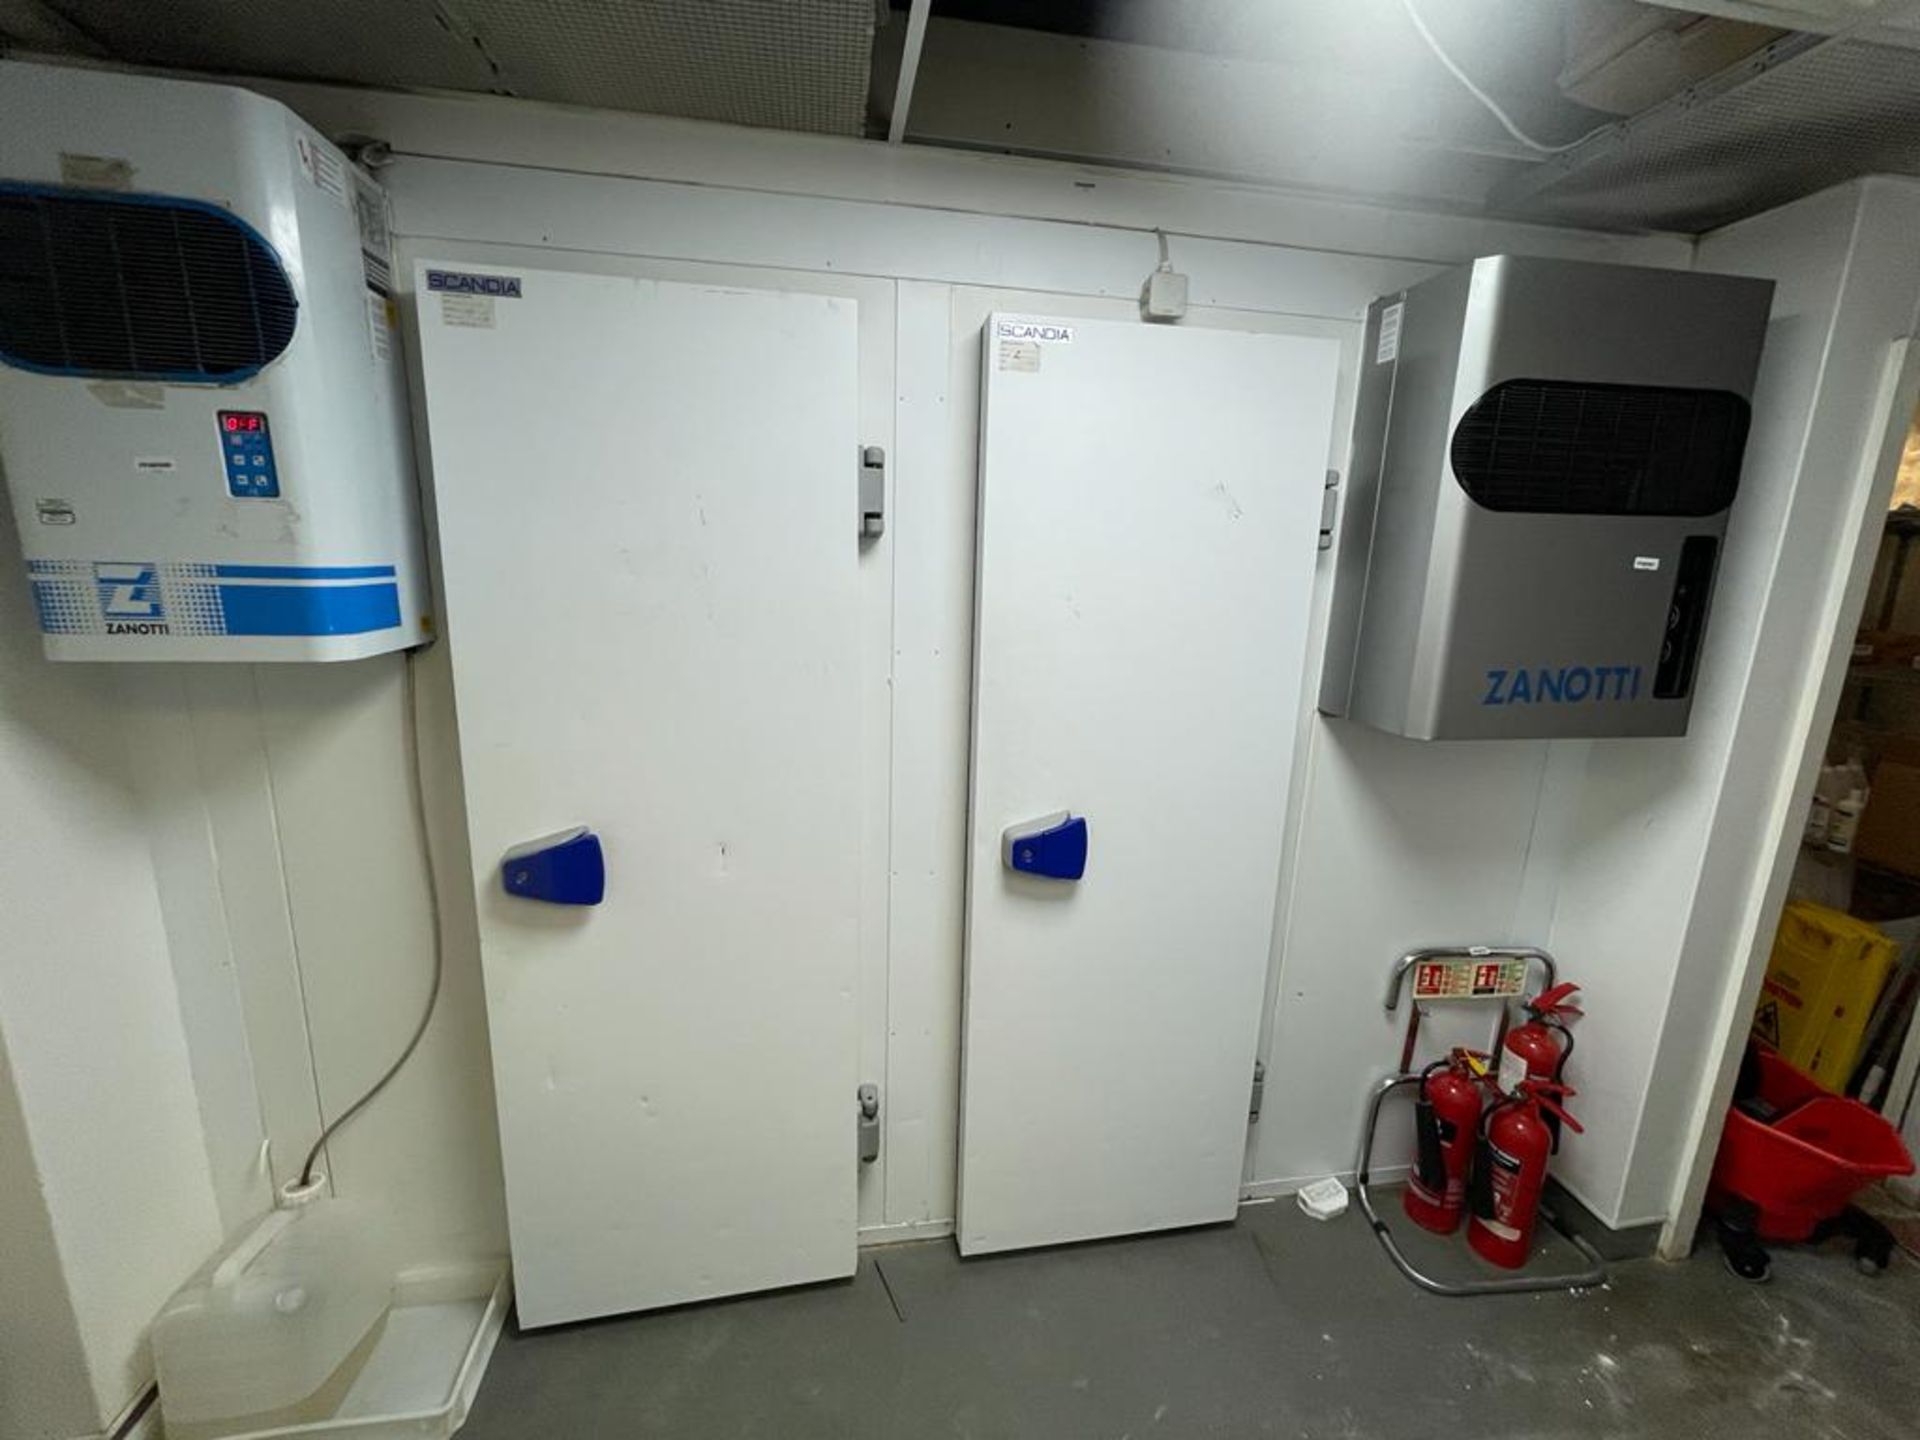 1 x Walk In Refrigerated Cold and Freezer With Zanotti Control Units - Ref: BK249 - CL686 -